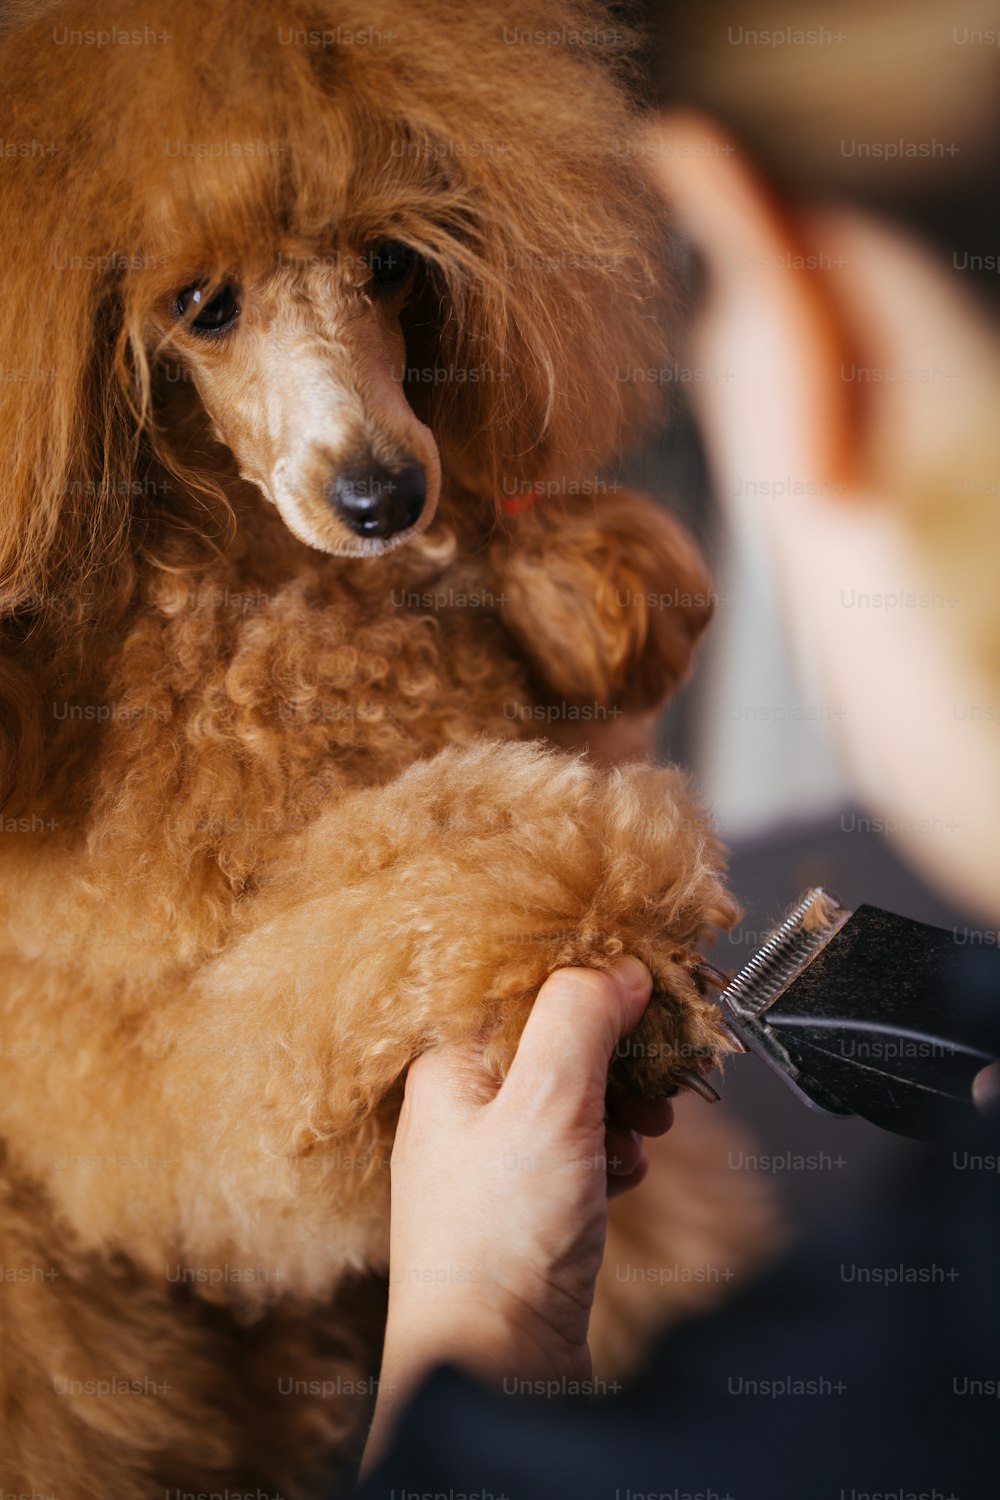 Dog grooming process. Close up shot of professional groomer trimming dog's claws.